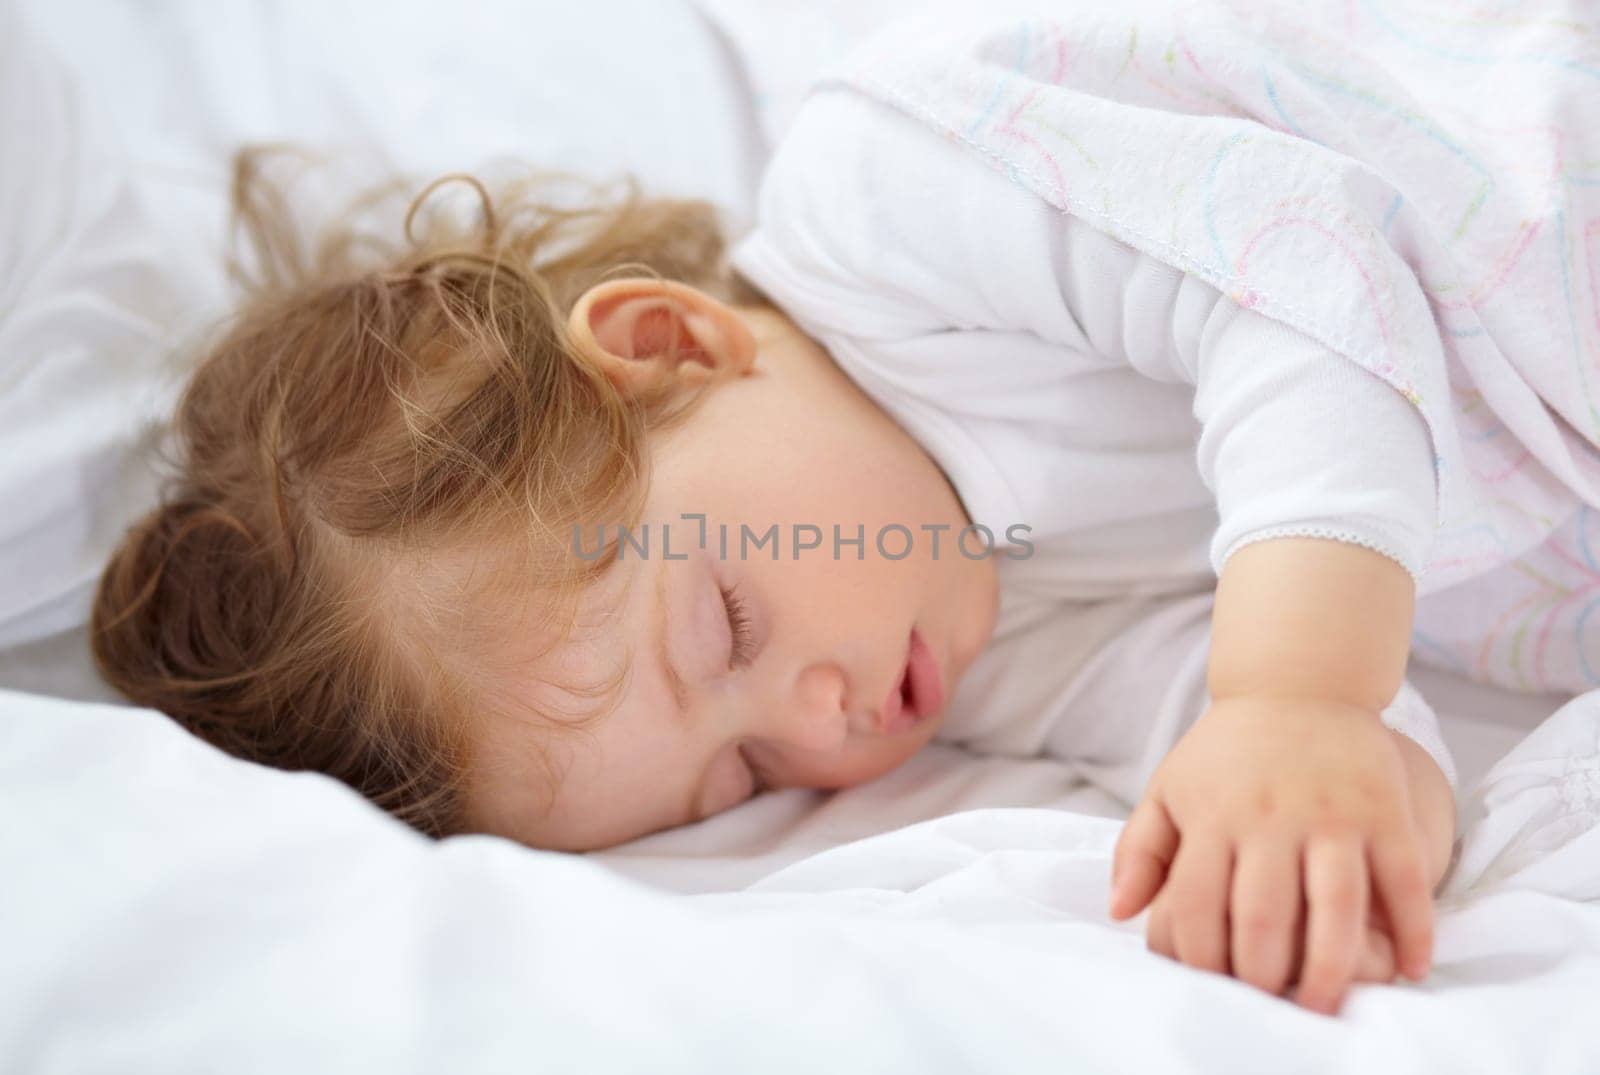 Face, baby and kid sleeping on bed for calm break, peace and dreaming to relax at home. Tired young child asleep with blanket for newborn development, healthy childhood growth or rest in nursery room by YuriArcurs